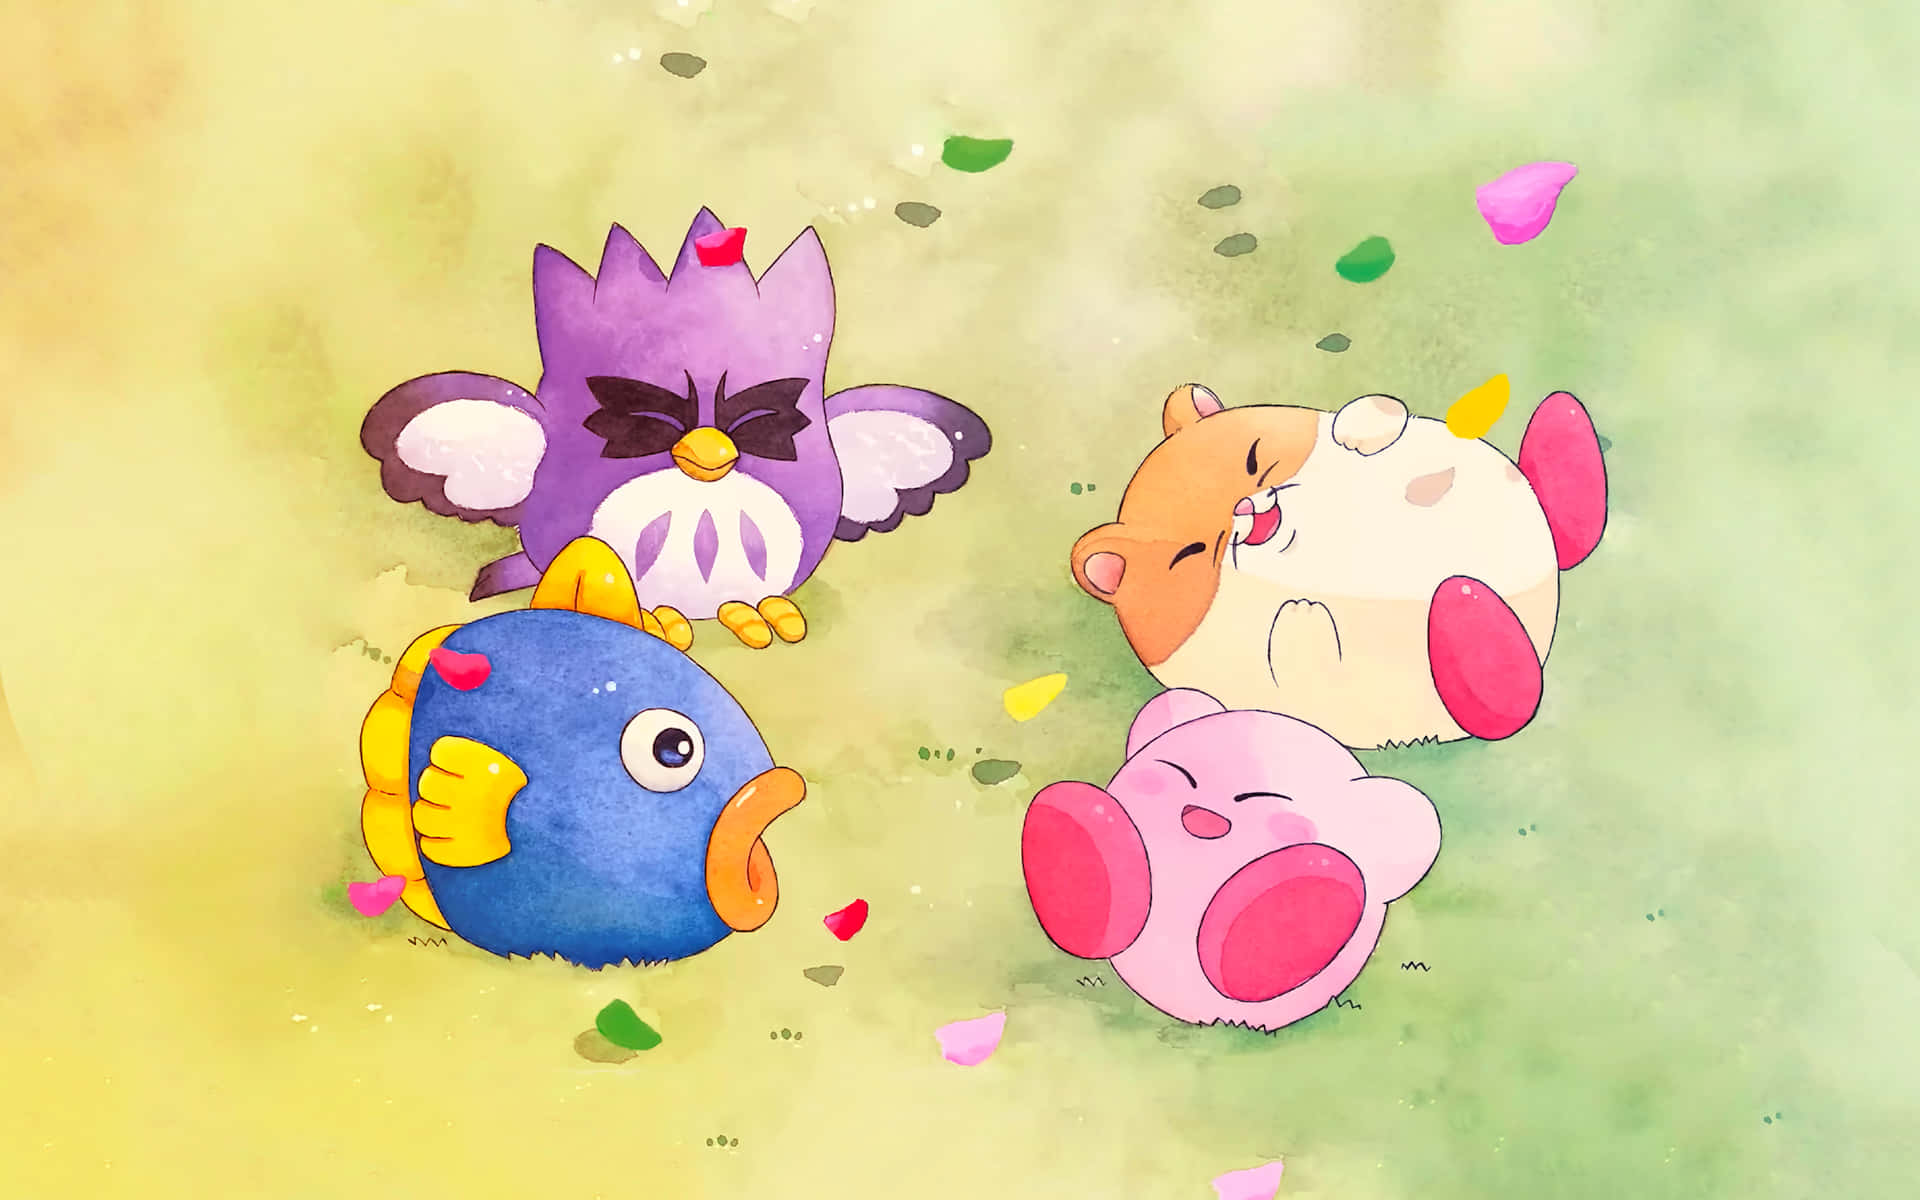 Kirby_and_ Friends_ Celebration Wallpaper